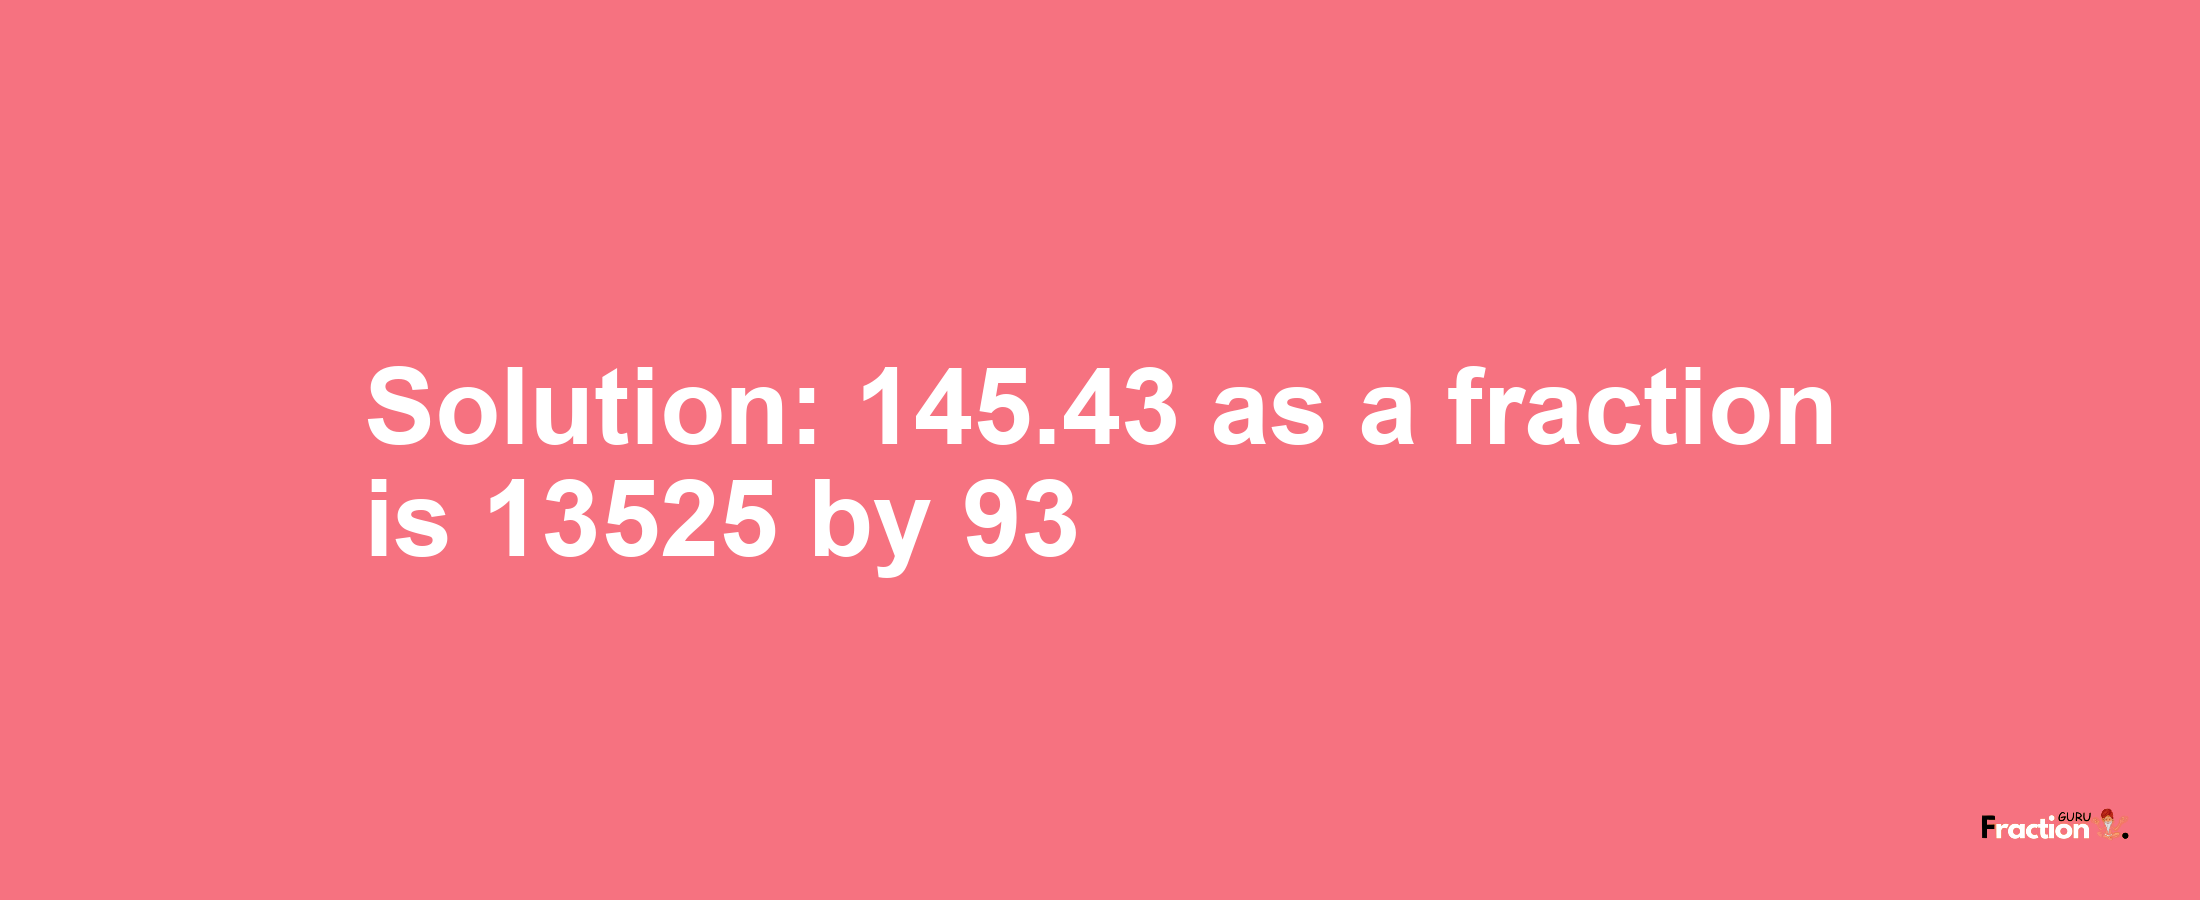 Solution:145.43 as a fraction is 13525/93